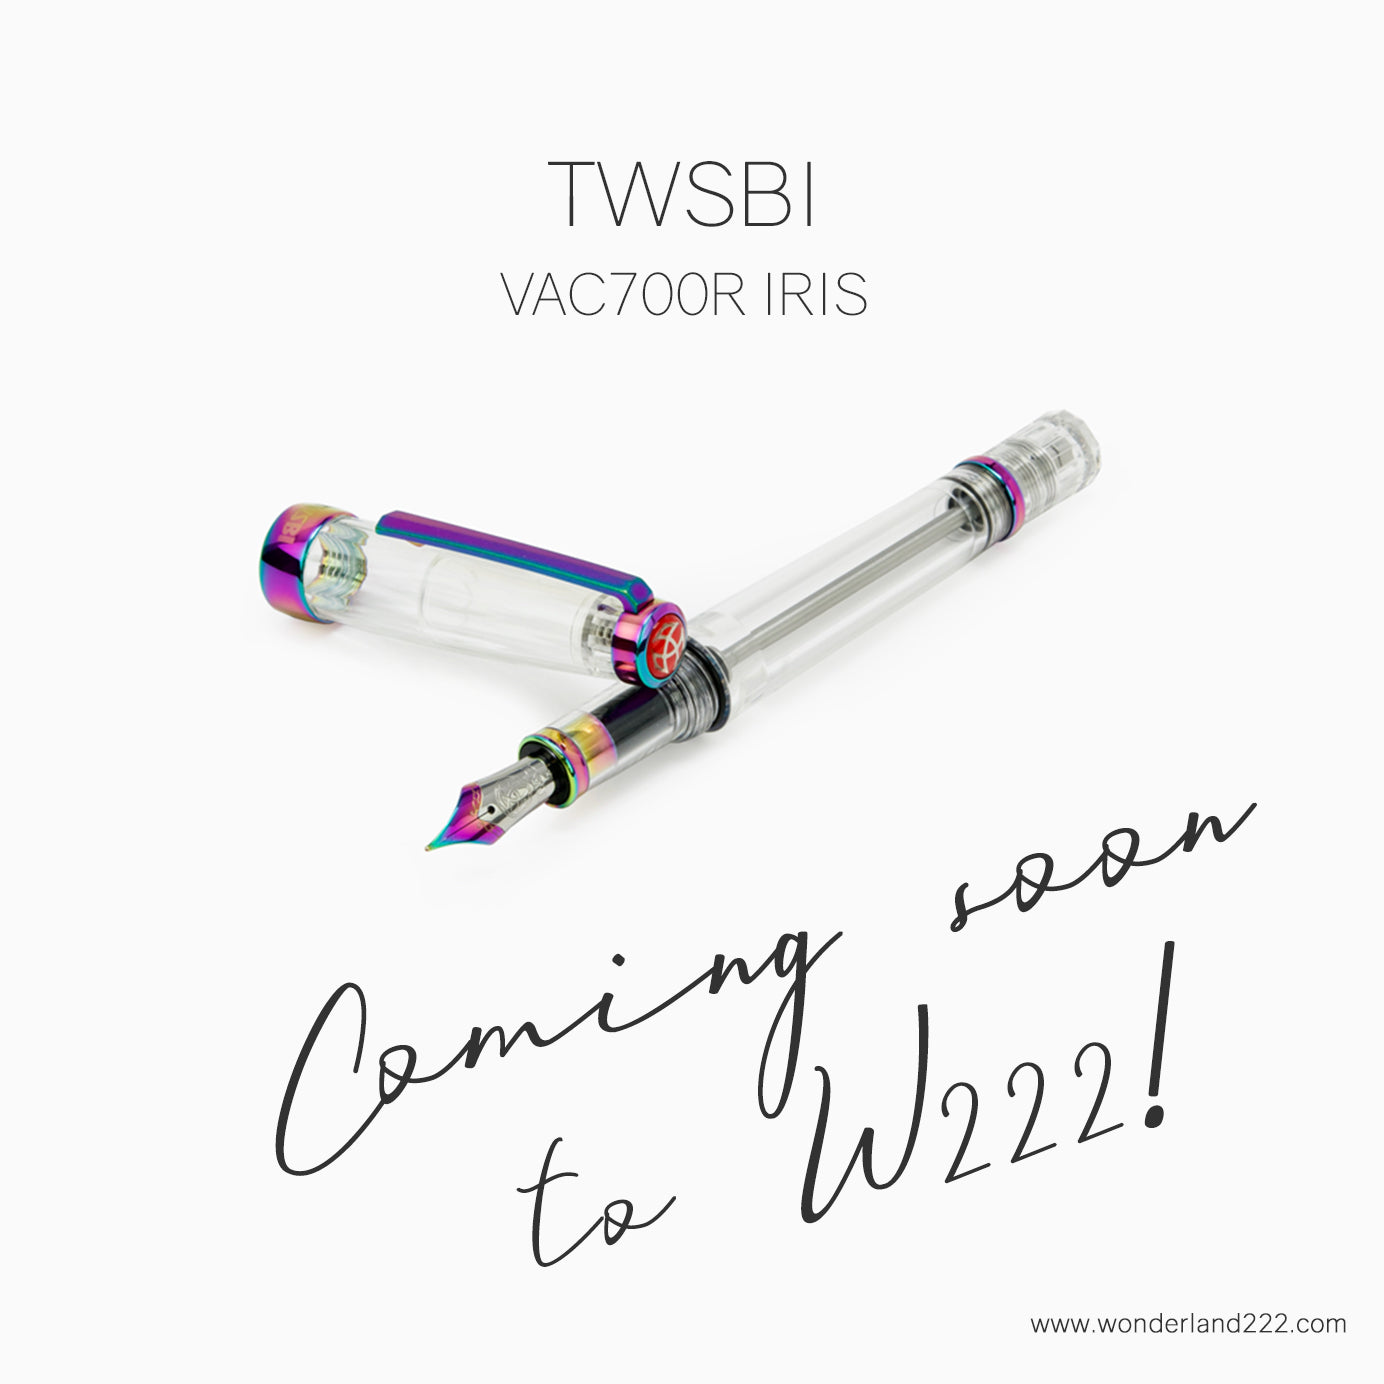 Coming soon!  TWSBI Limited VAC700R Iris and the New Lilac ECO